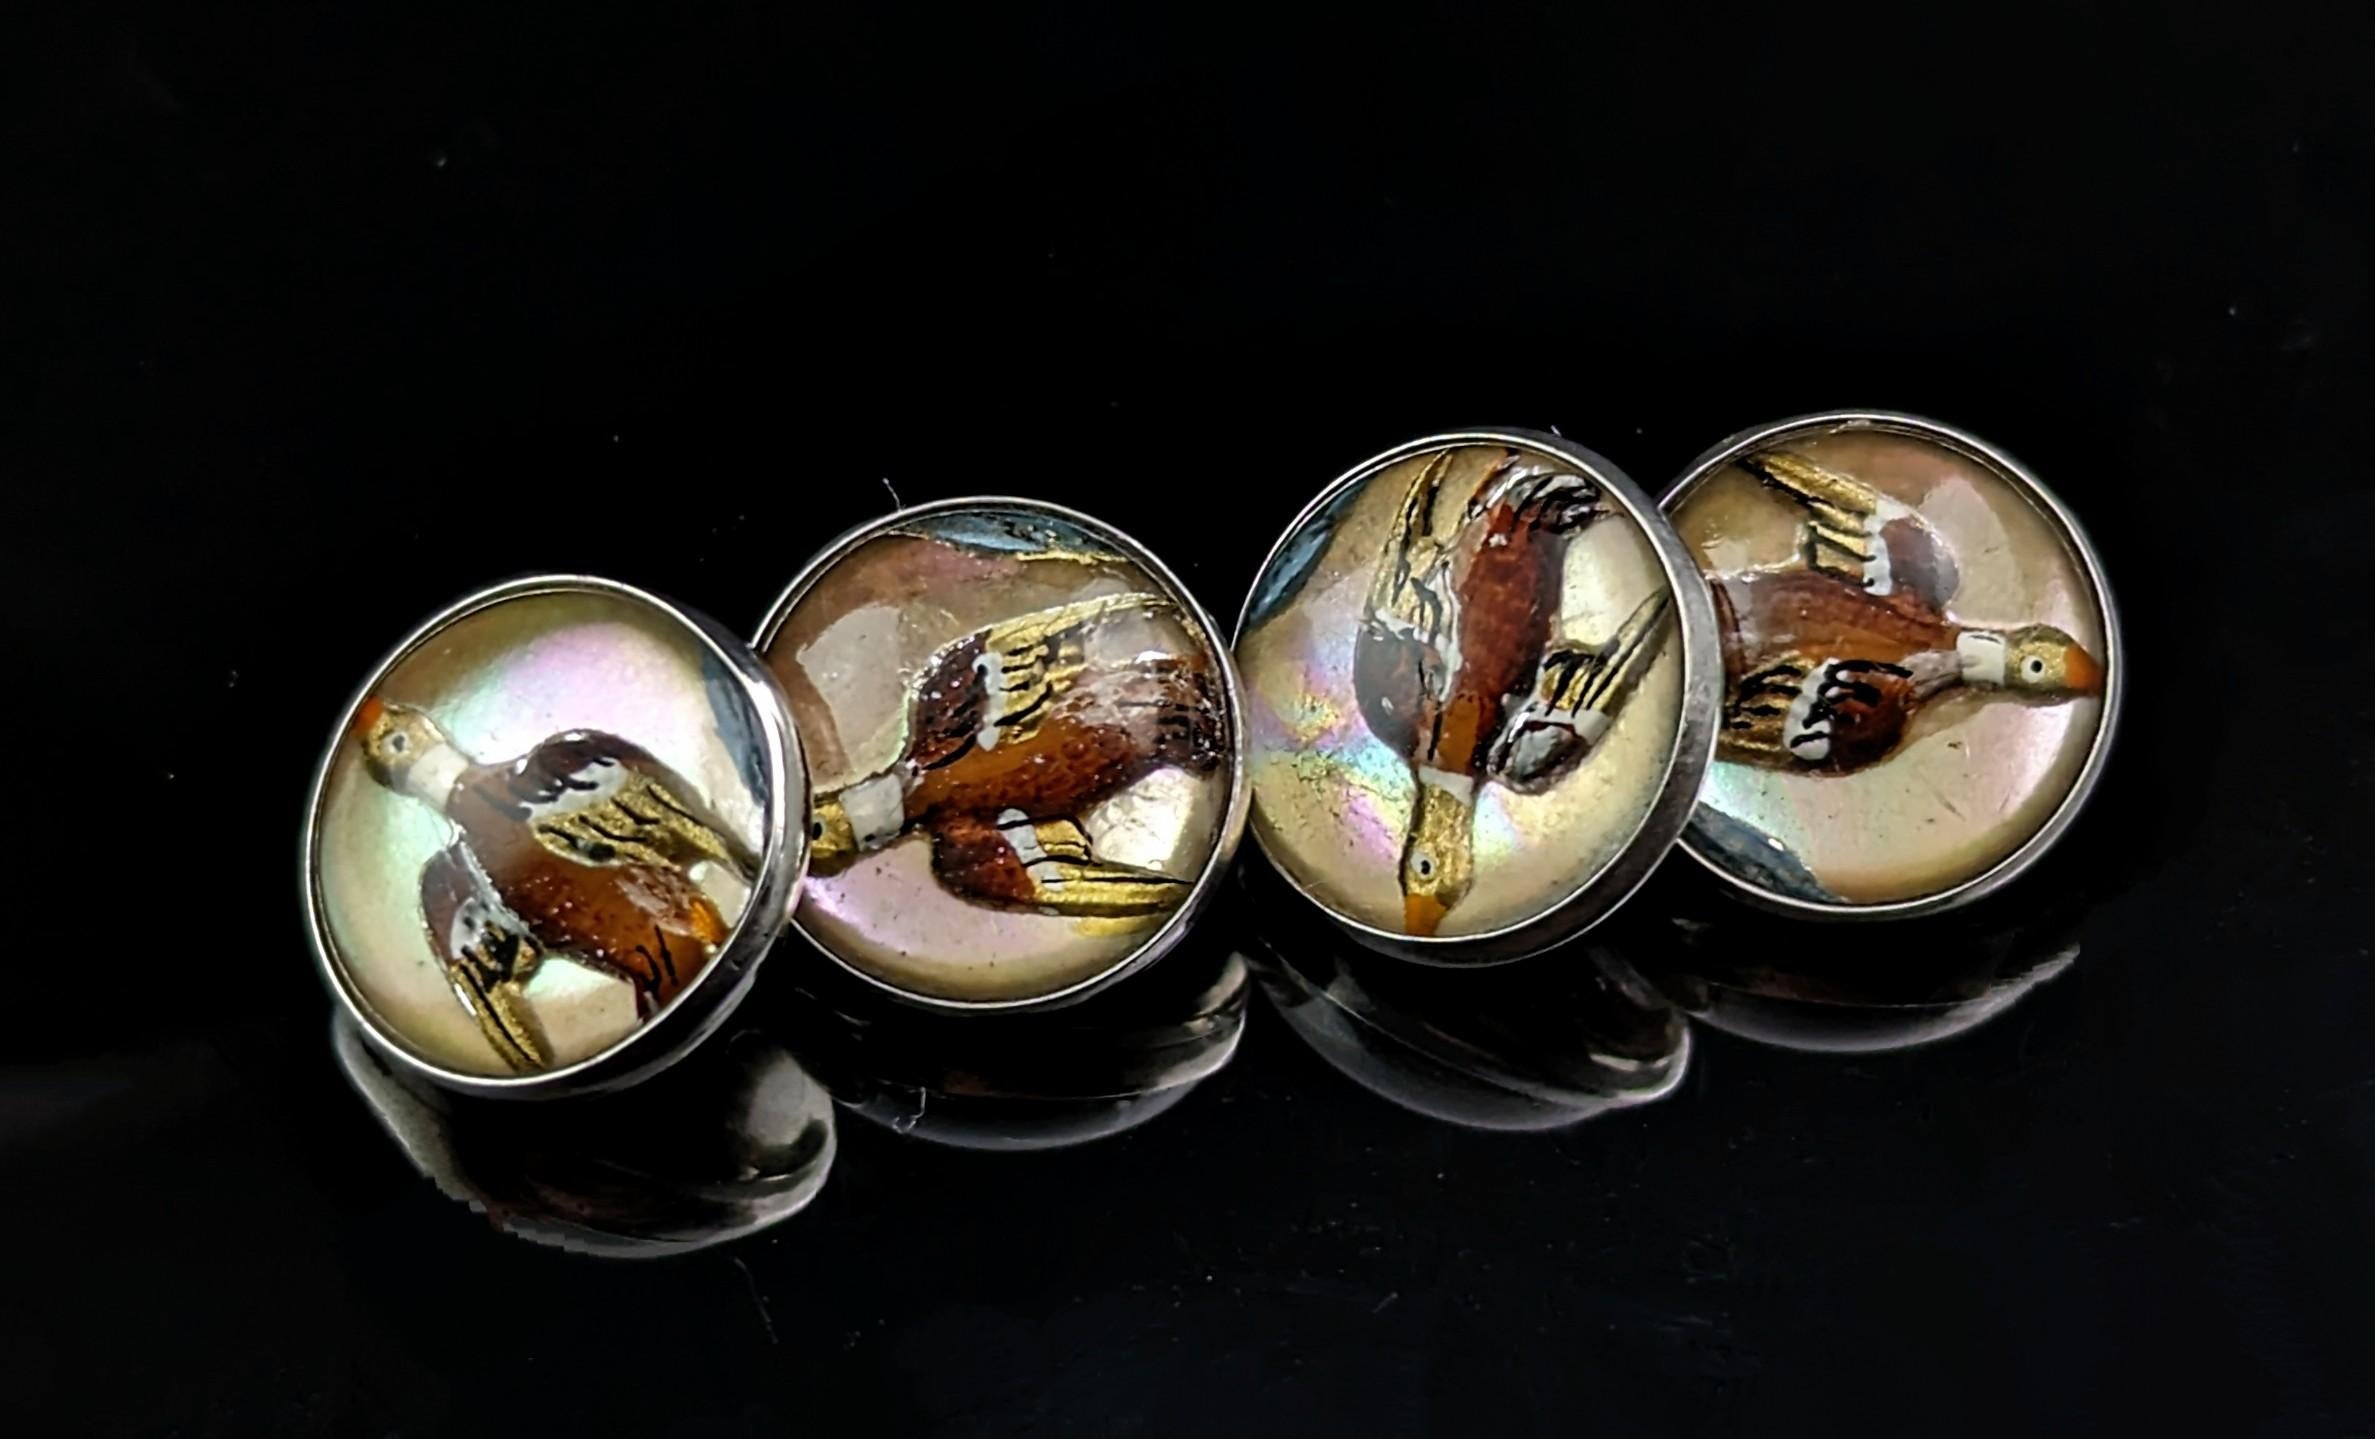 You can't go wrong with a good pair of fun vintage cufflinks and that's exactly what these are.

Modelled in sterling silver these Aer Deco era cufflinks feature reverse painted rock crystal cabochons or Essex crystal as it is known.

These